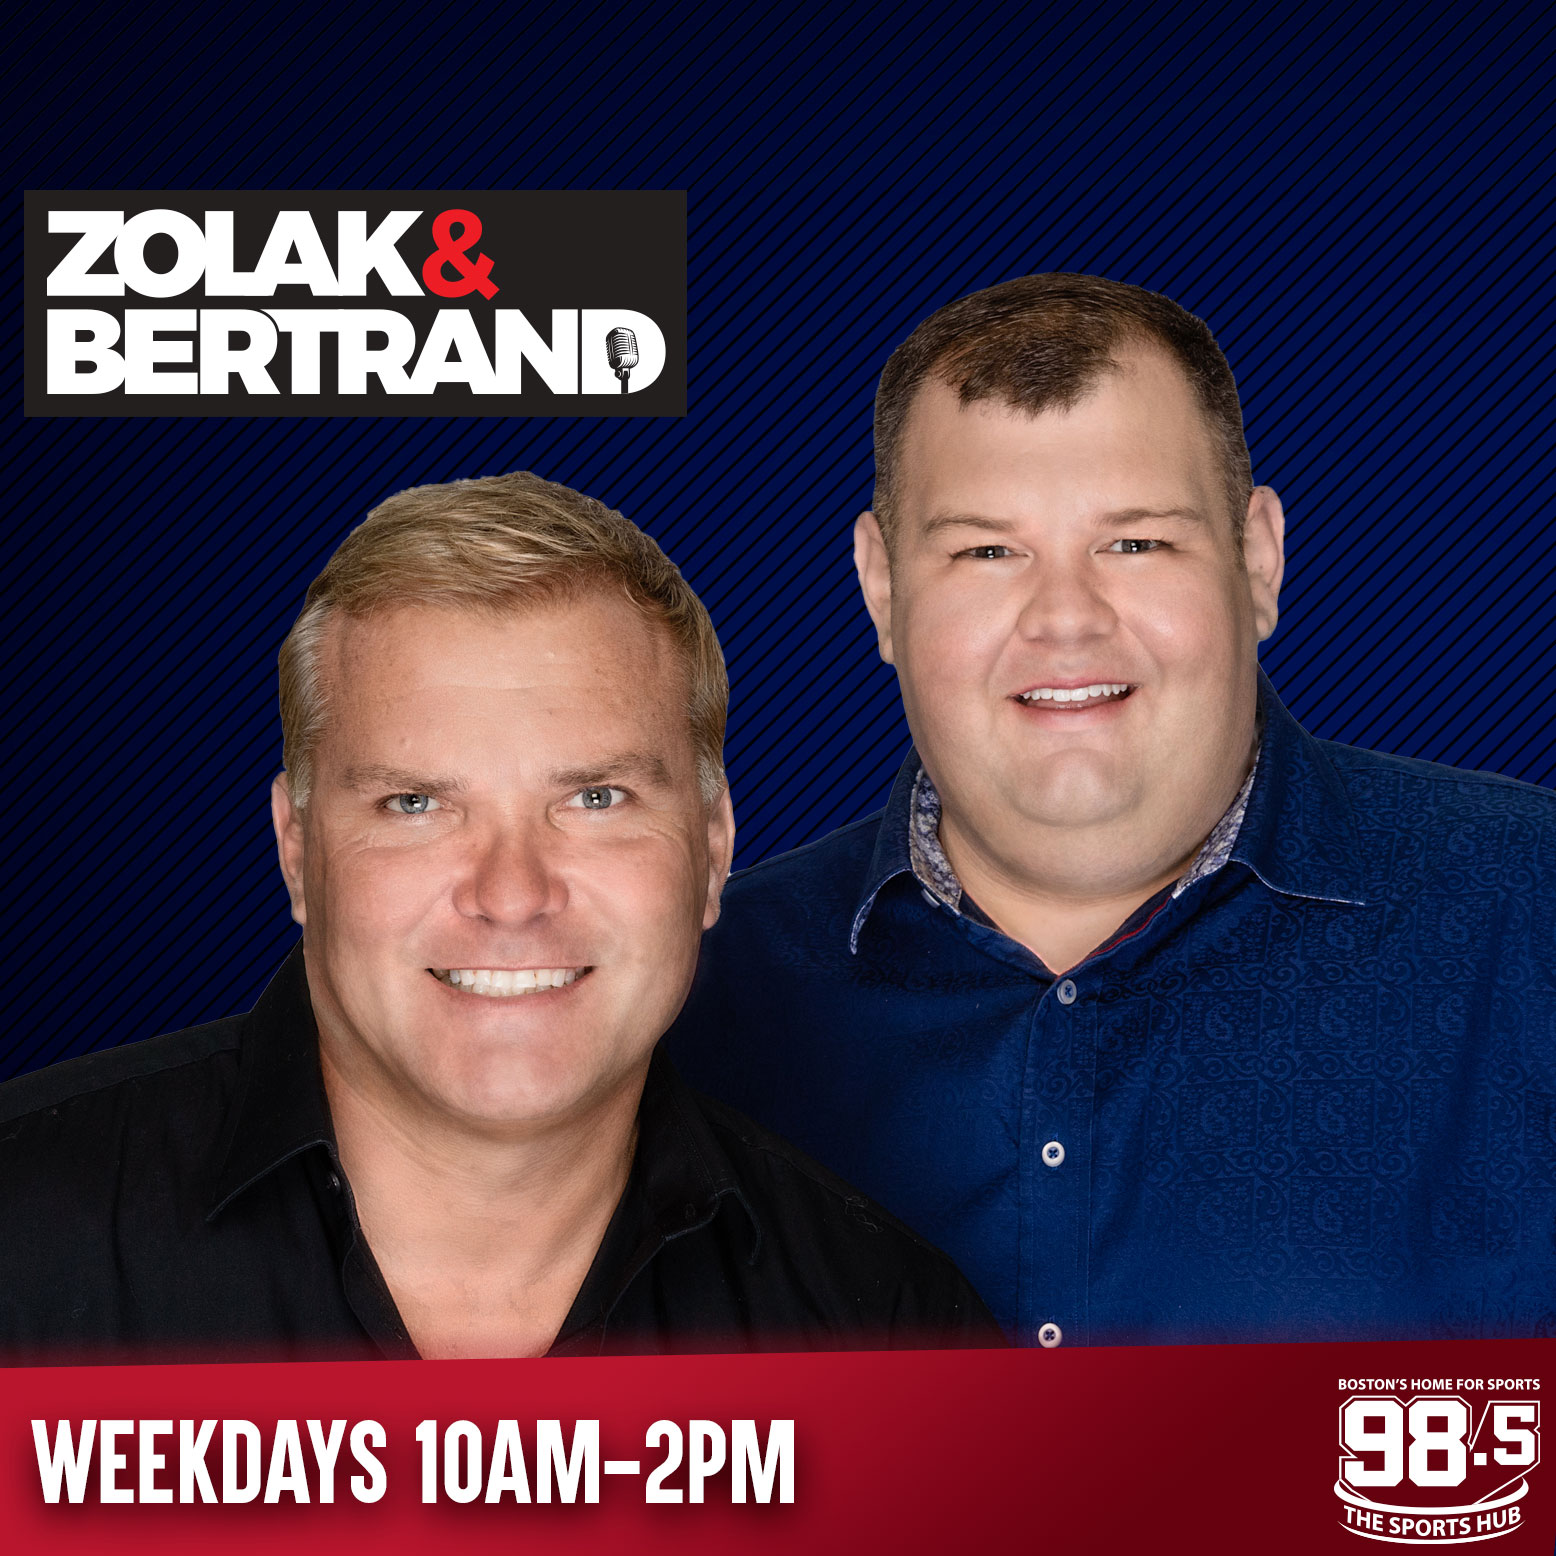 Zolak & Bertrand: Albert Breer on the real news to come out of the Belichick contract report